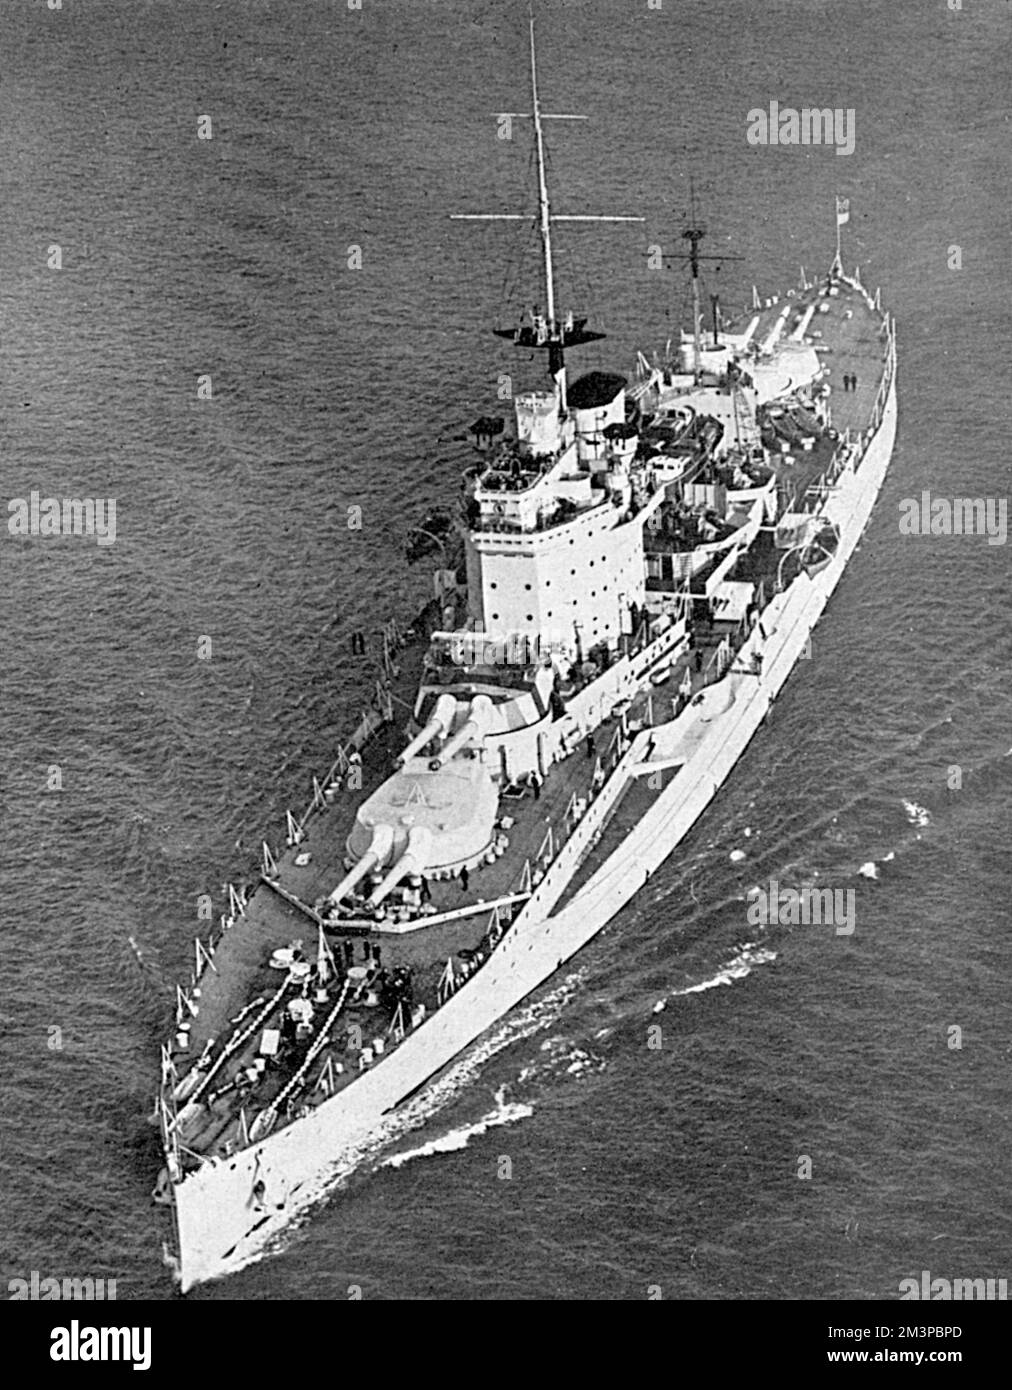 An overhead view of H.M.S.Warspite during the Battle of Cape Matapan. Warspite was a veteran British Queen Elizabeth class battleship which had taken part in the Battle of Jutland in World War I, and was subsequently entirely rebuilt. During the Battle of Cape Matapan, Warspite was the flagship of Admiral Andrew Cunningham.     Date: 27 - 29 March 1941 Stock Photo